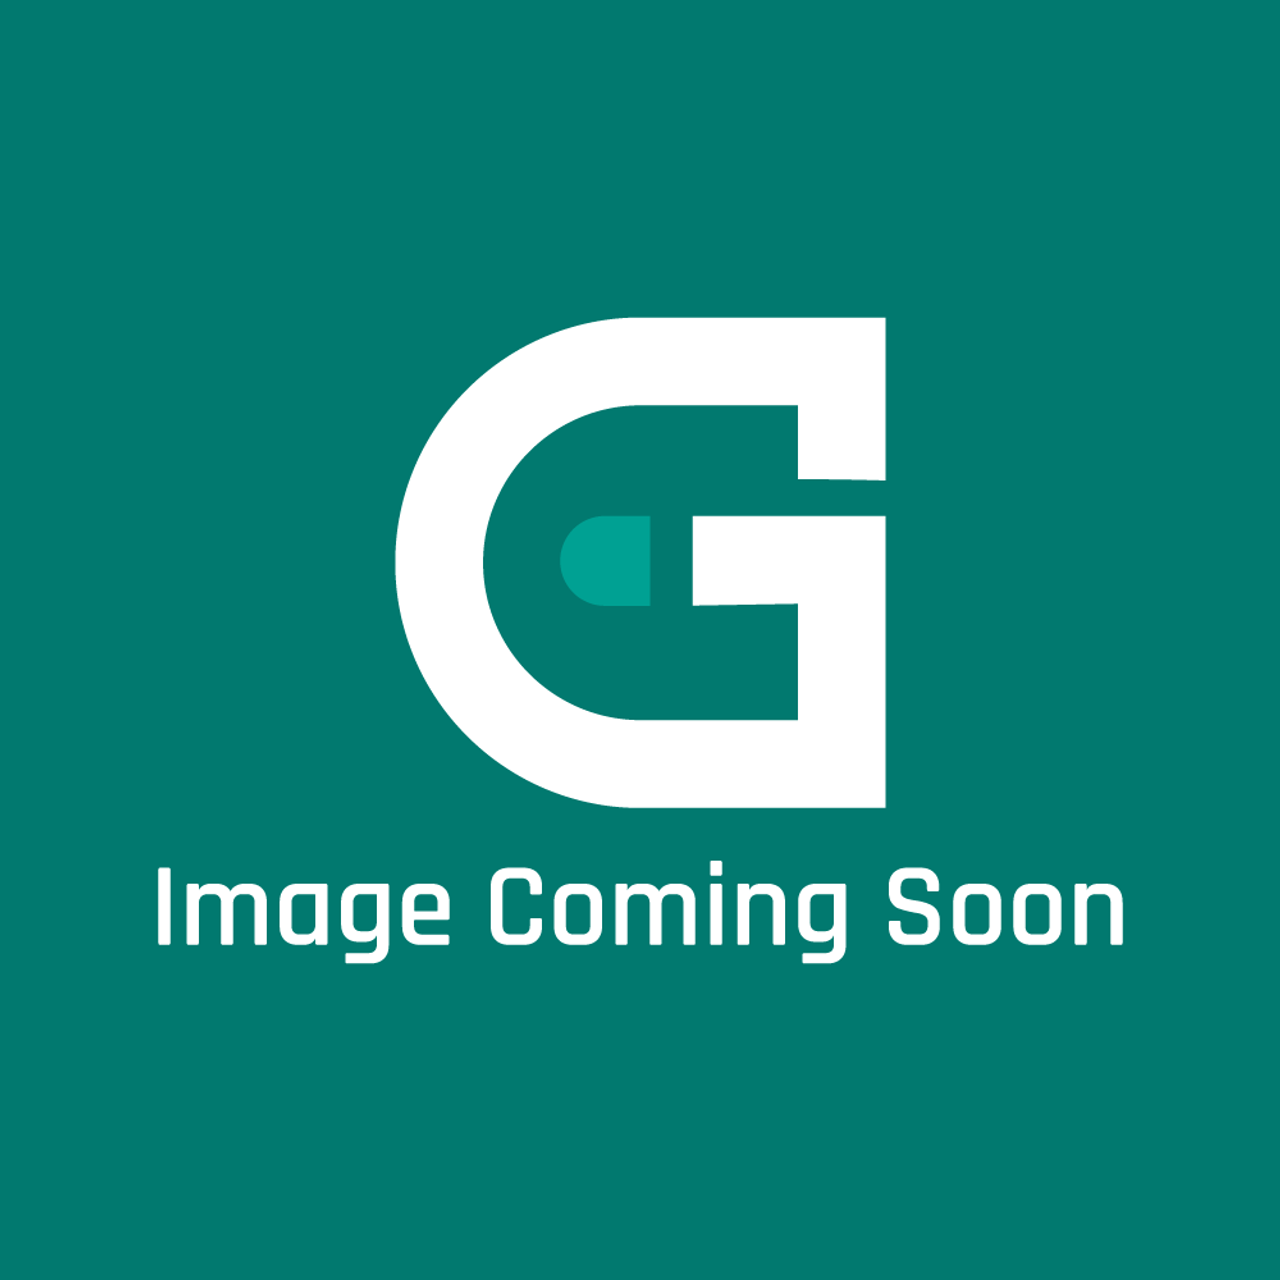 Frigidaire - Electrolux 316452703 Dsp Glass - Image Coming Soon!